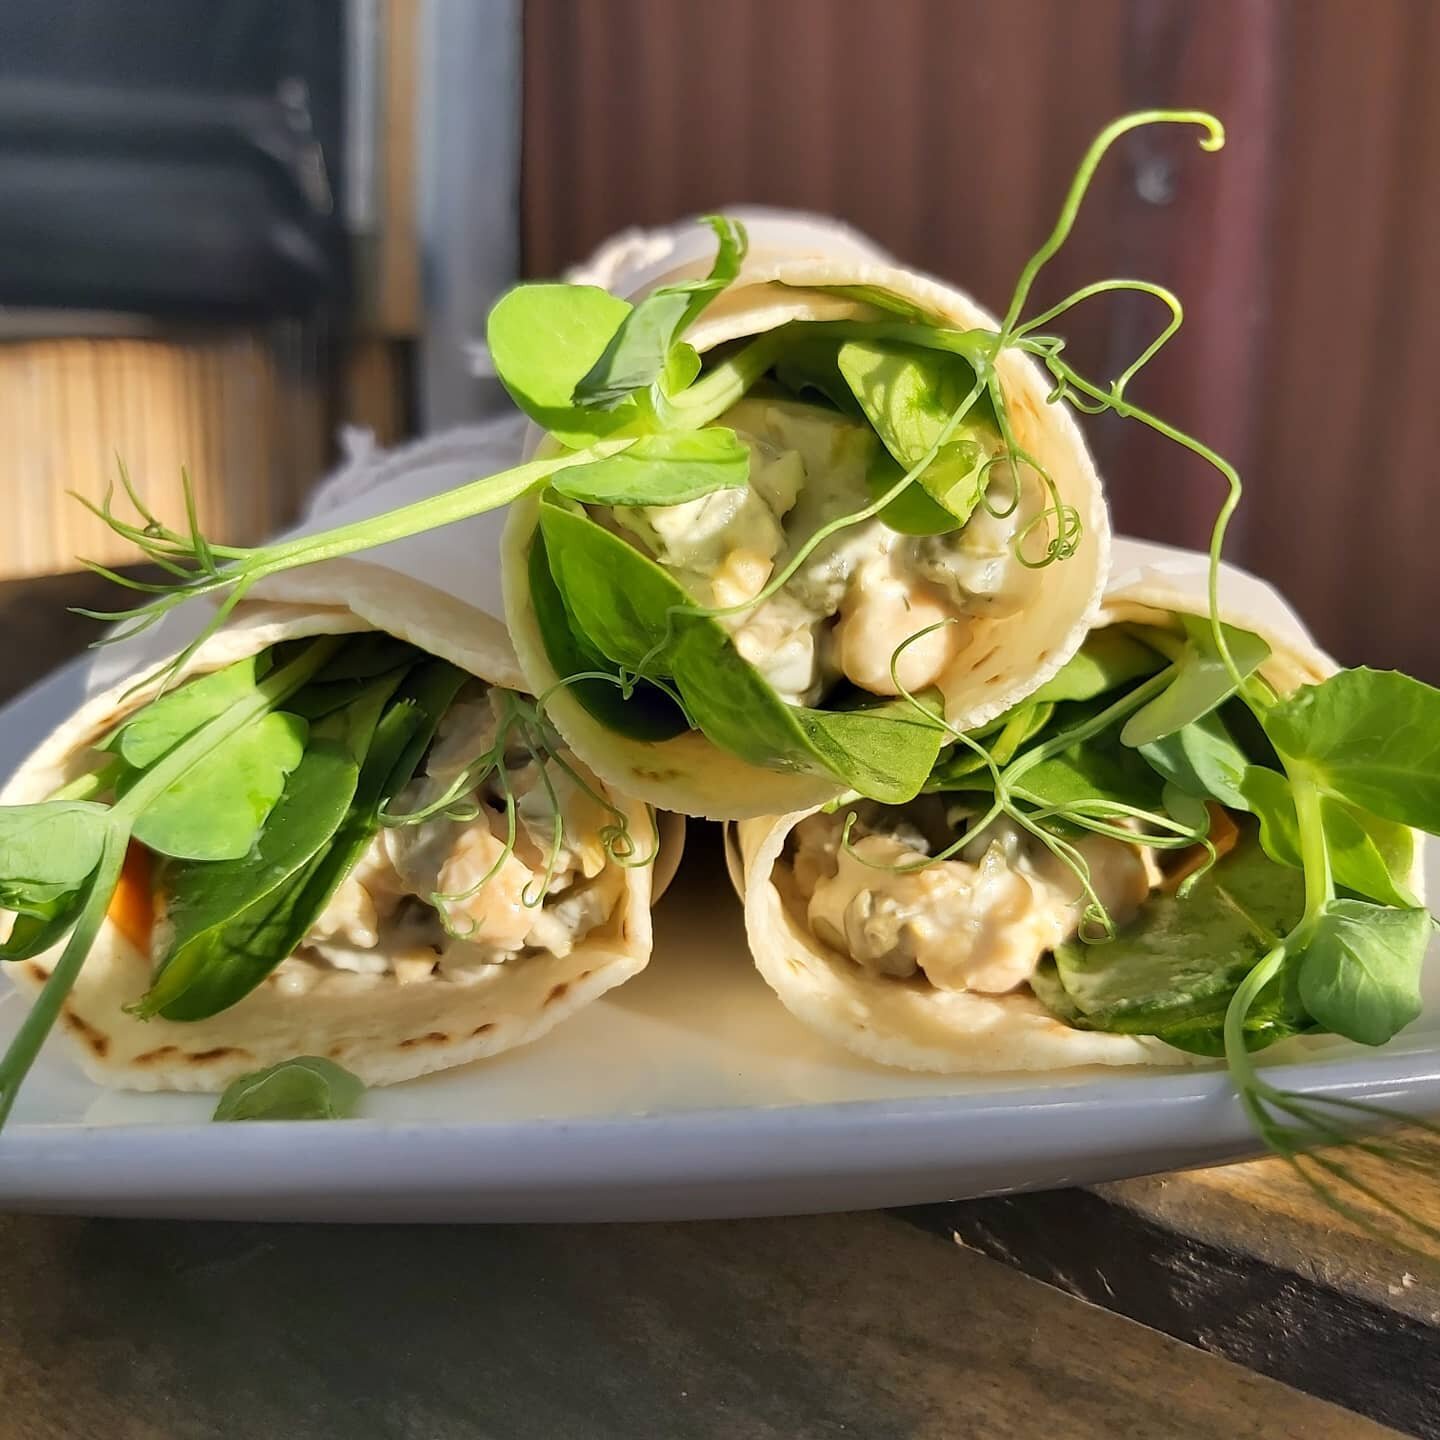 Charlie &quot;Tuna&quot; is back and in my opinion better than ever! 🐟

Roasted chickpeas with horseradish mayo, pickles, capers, pickled carrots, toasted nori &amp; baby spinach. All nestled in a delicious gf wrap!

Charlie is vegan and gluten free